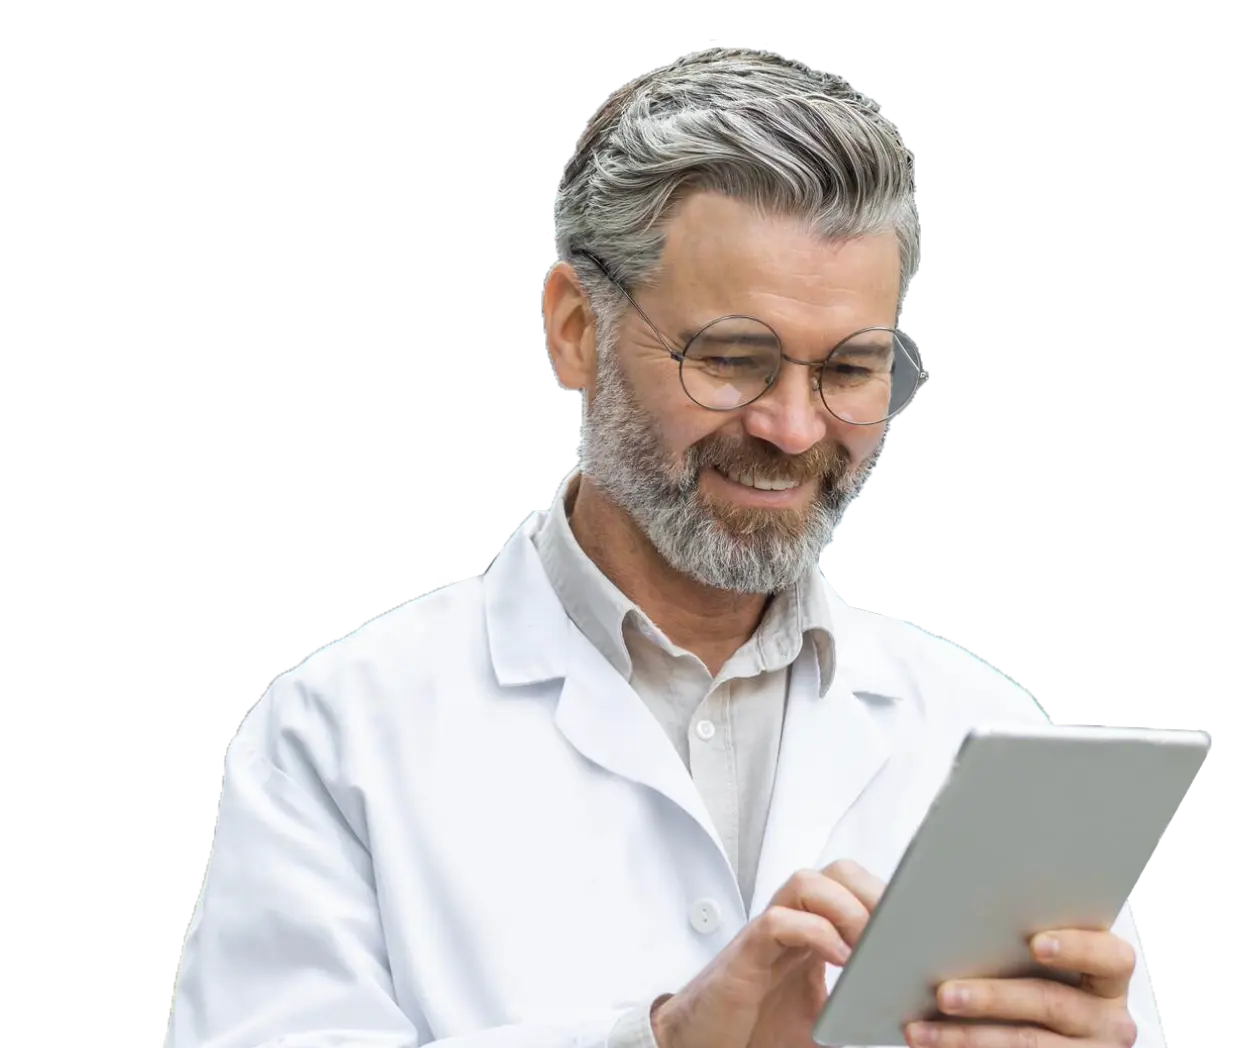 Programs; elderly doctor with round glasses touching the screen of a digital tablet and smiling